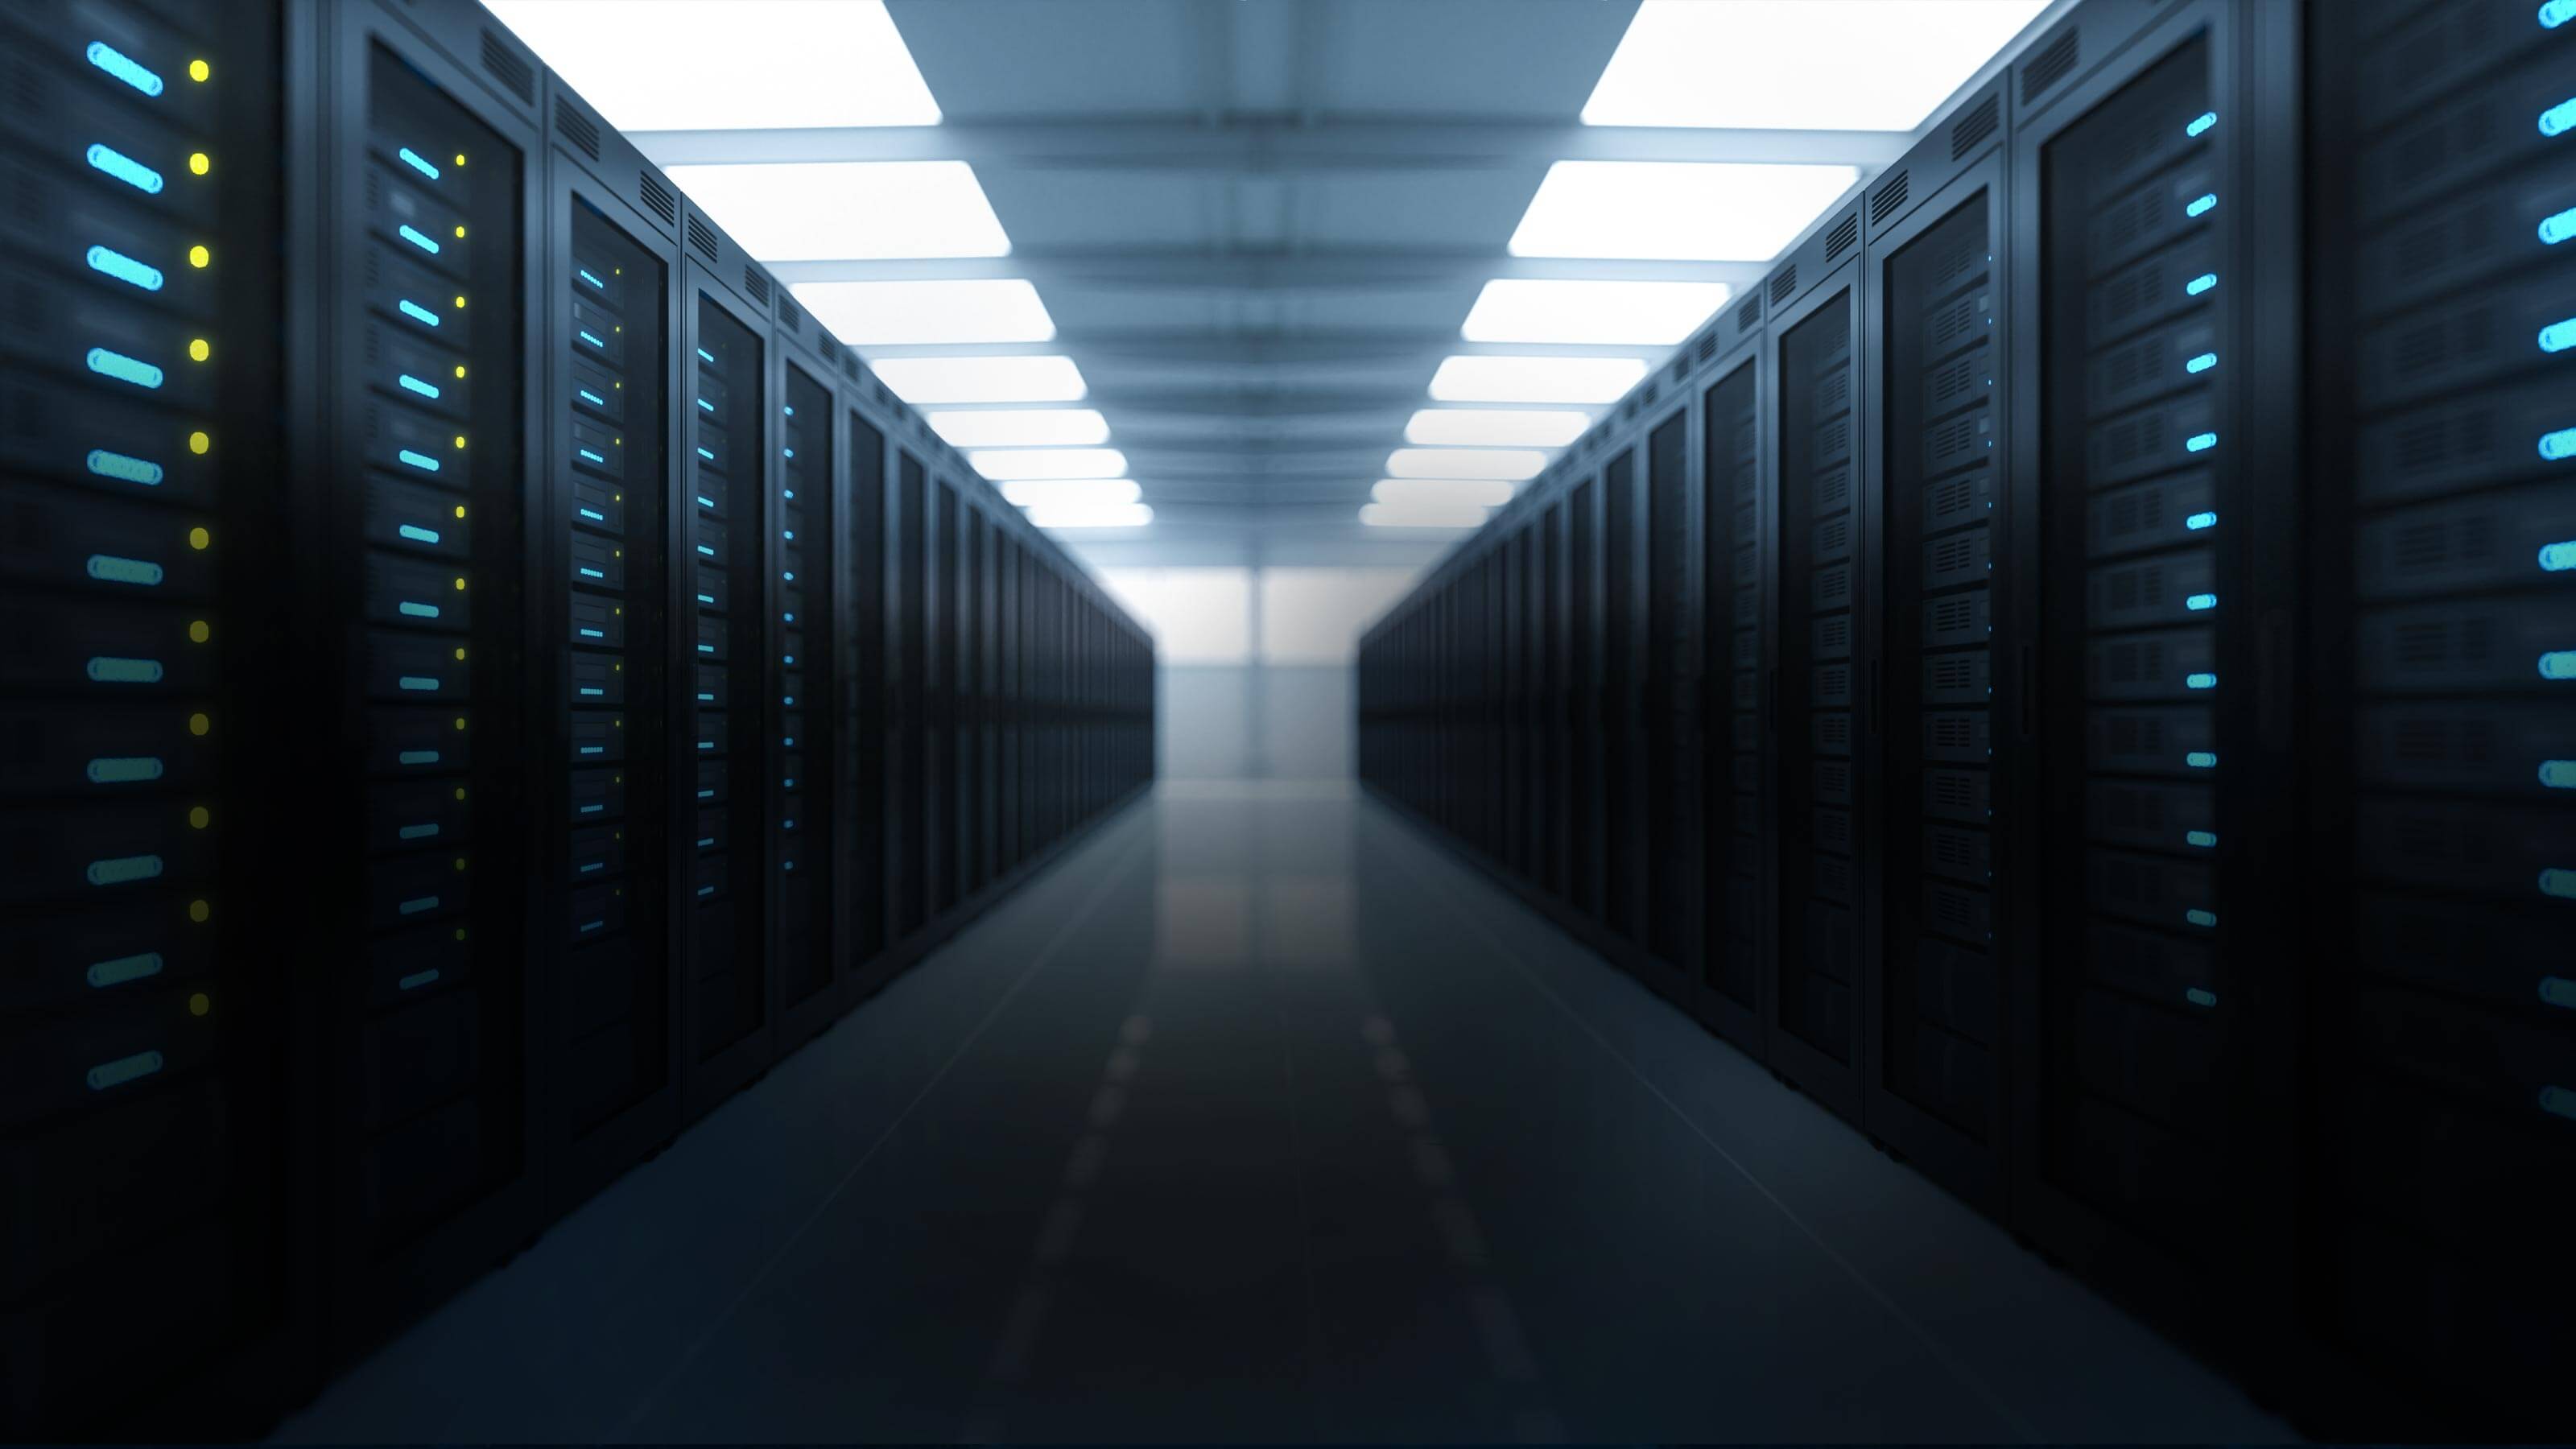 What makes Dedicated Hosting so enticing to big companies?